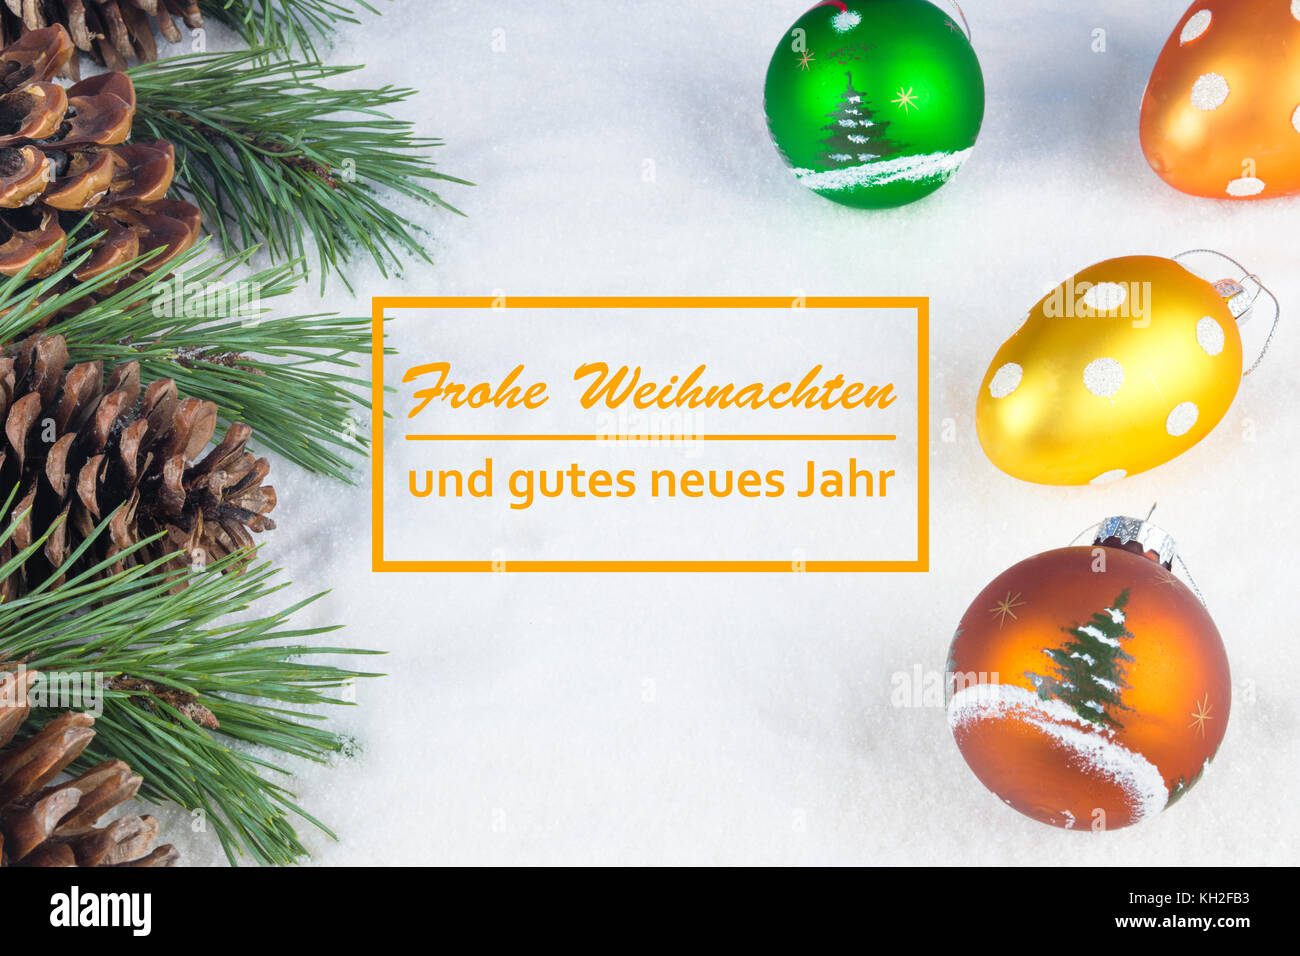 Group of pine trees, some branches and colorful baubles and Christmas balls with text in German "Frohe Weihnachten und gutes neues Jahr" in white snow Stock Photo